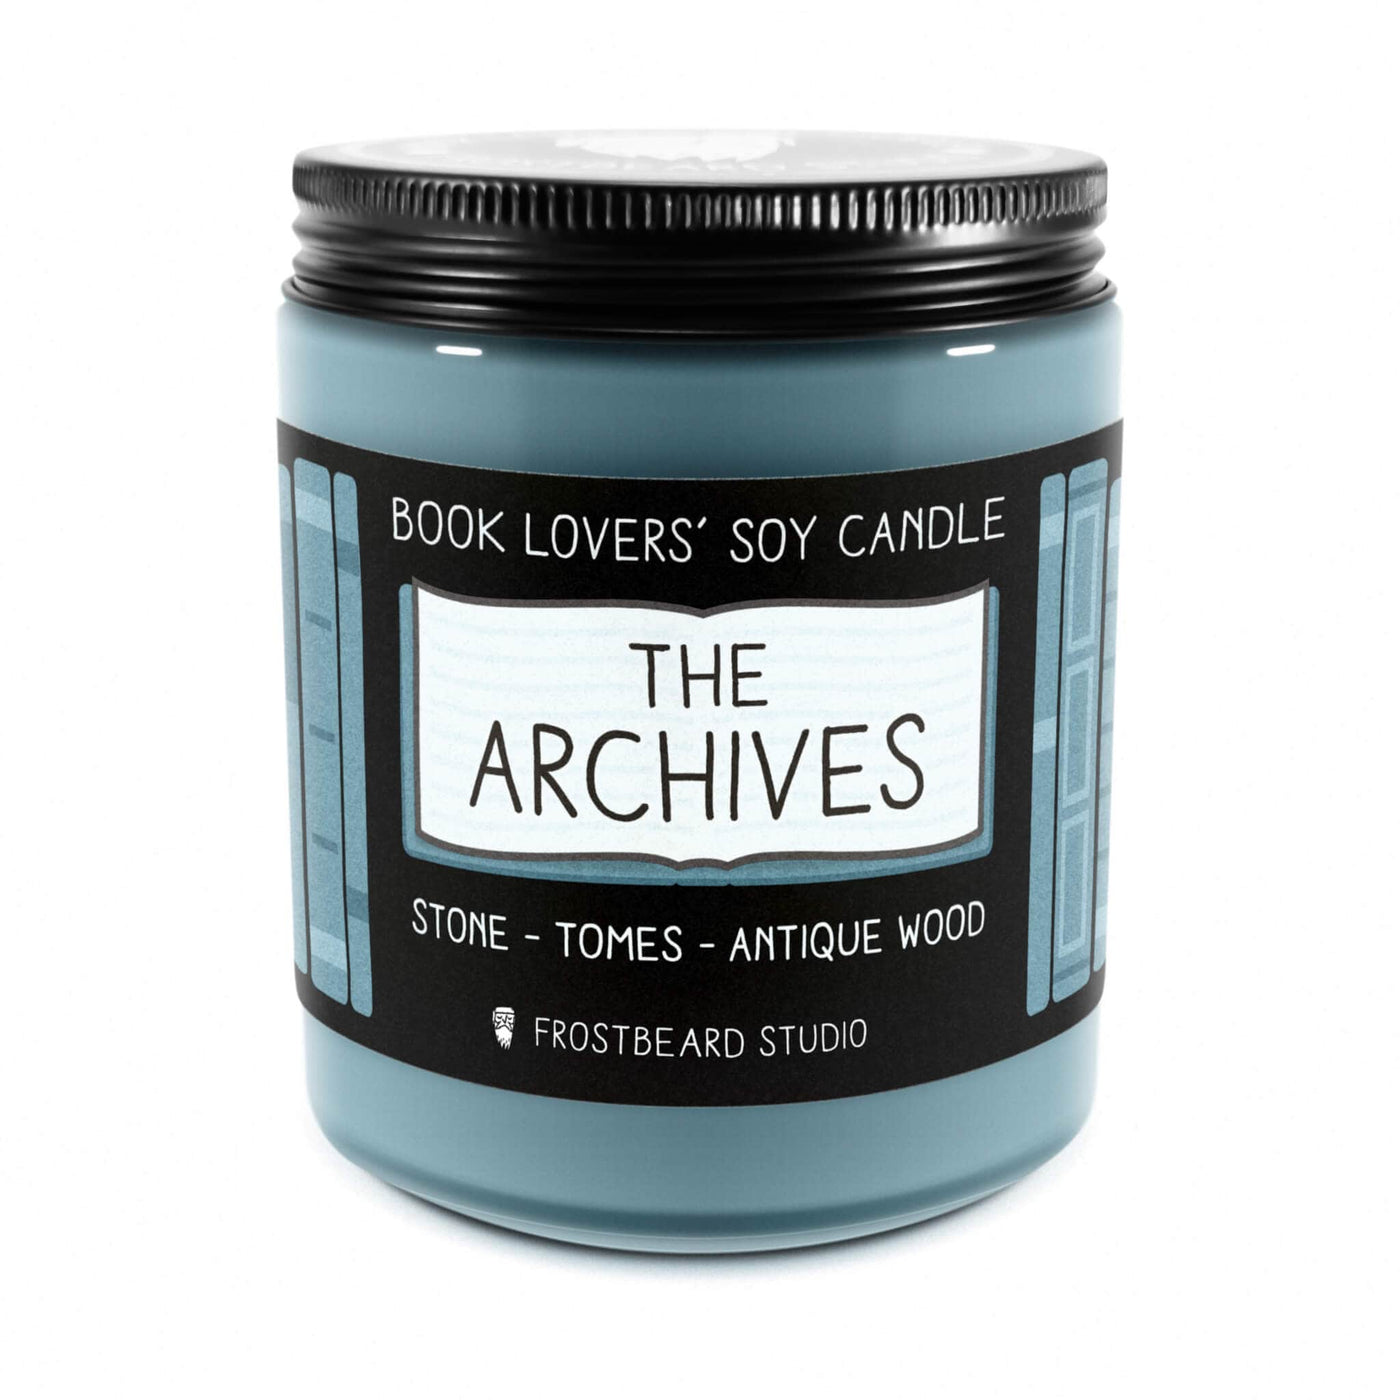 The Archives - 8 oz Jar - Book Lovers' Soy Candle - Frostbeard Studio